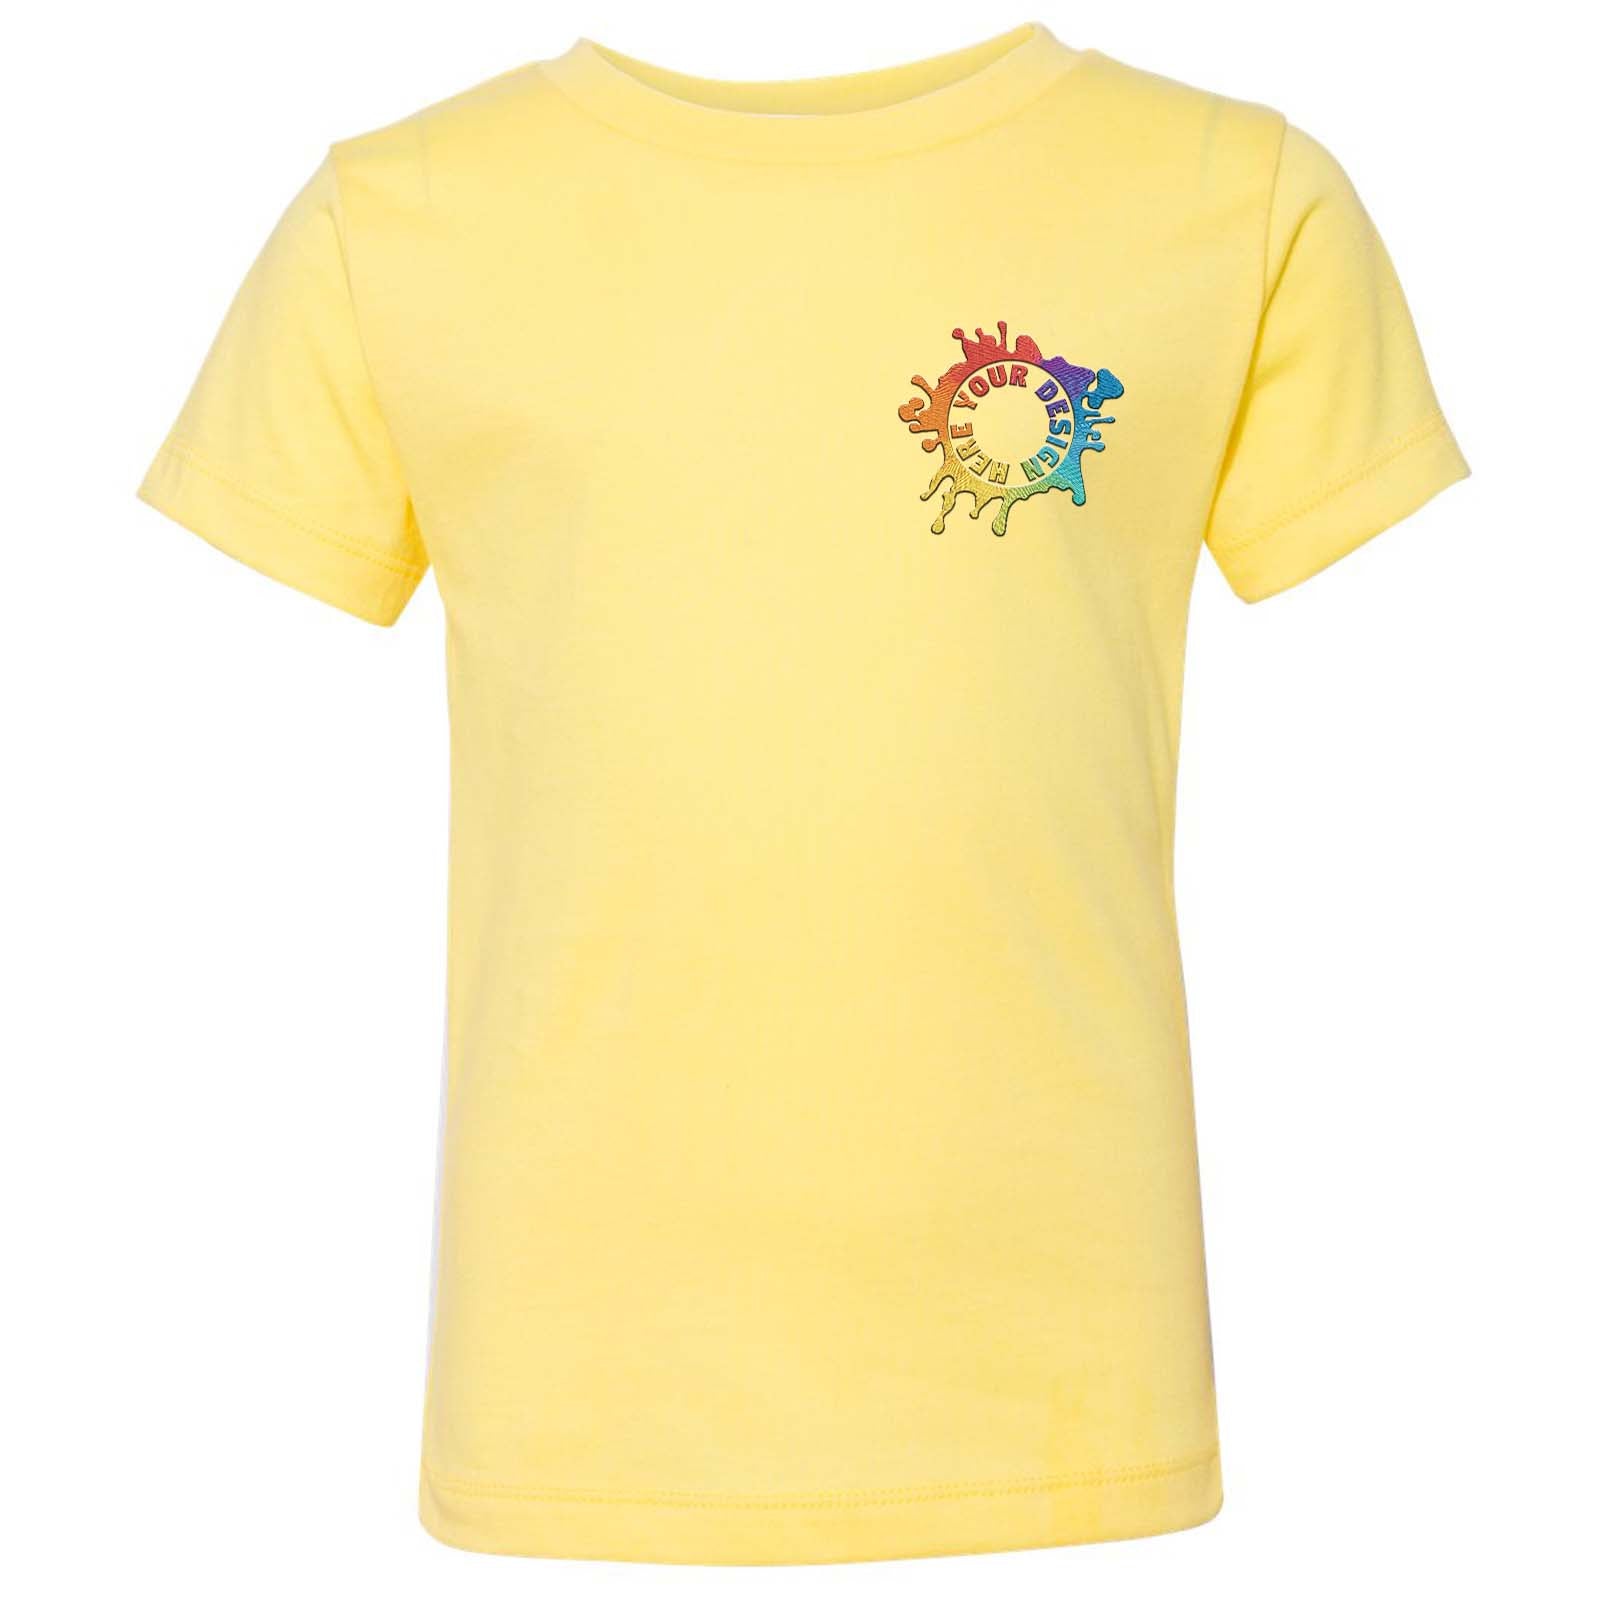 Bella + Canvas Toddler Unisex 100% Cotton T-Shirt Embroidery